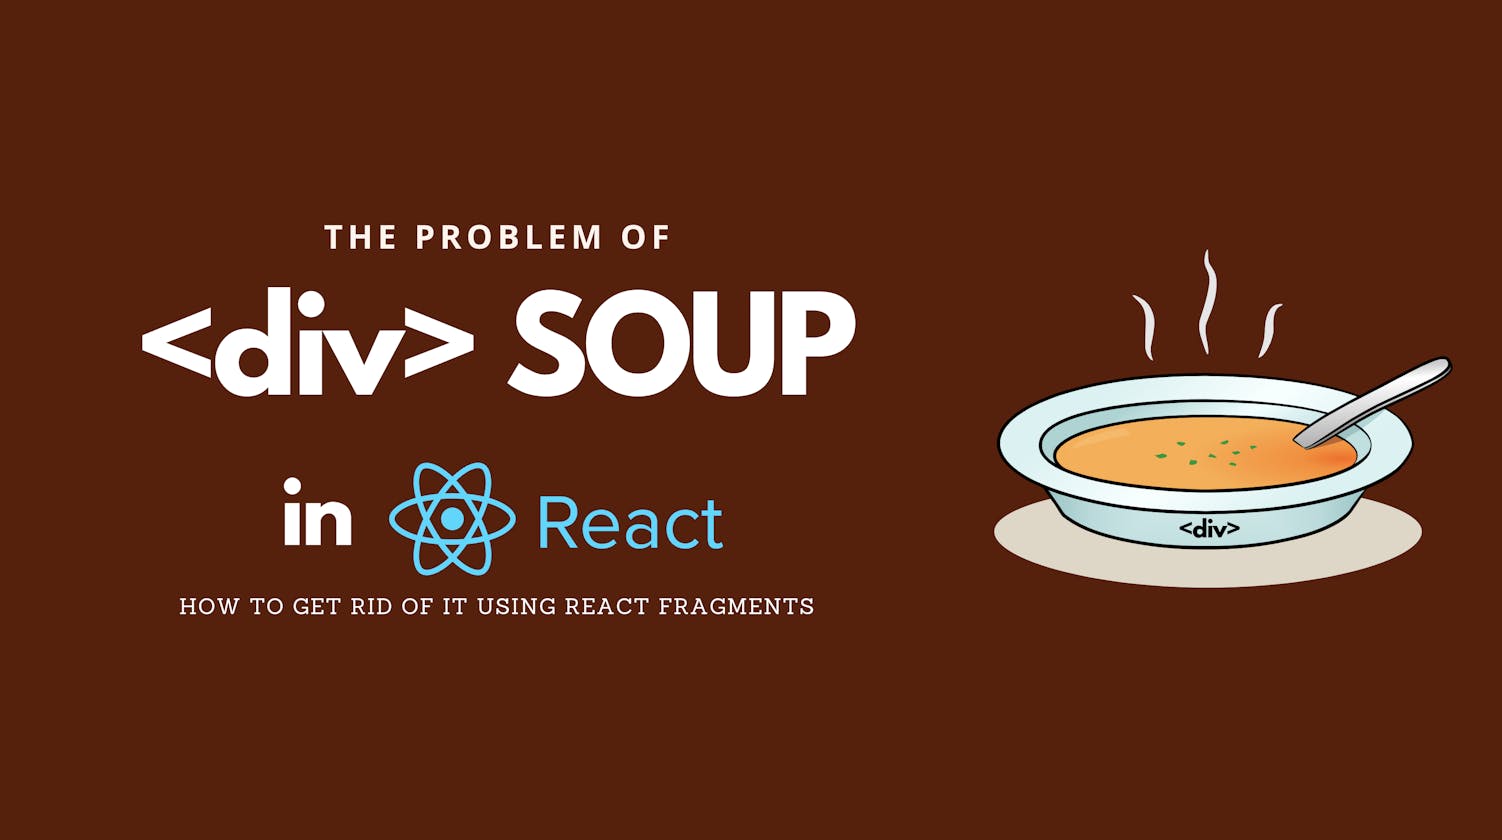 The problem of  '<div> Soup' in React. How to get rid of it?